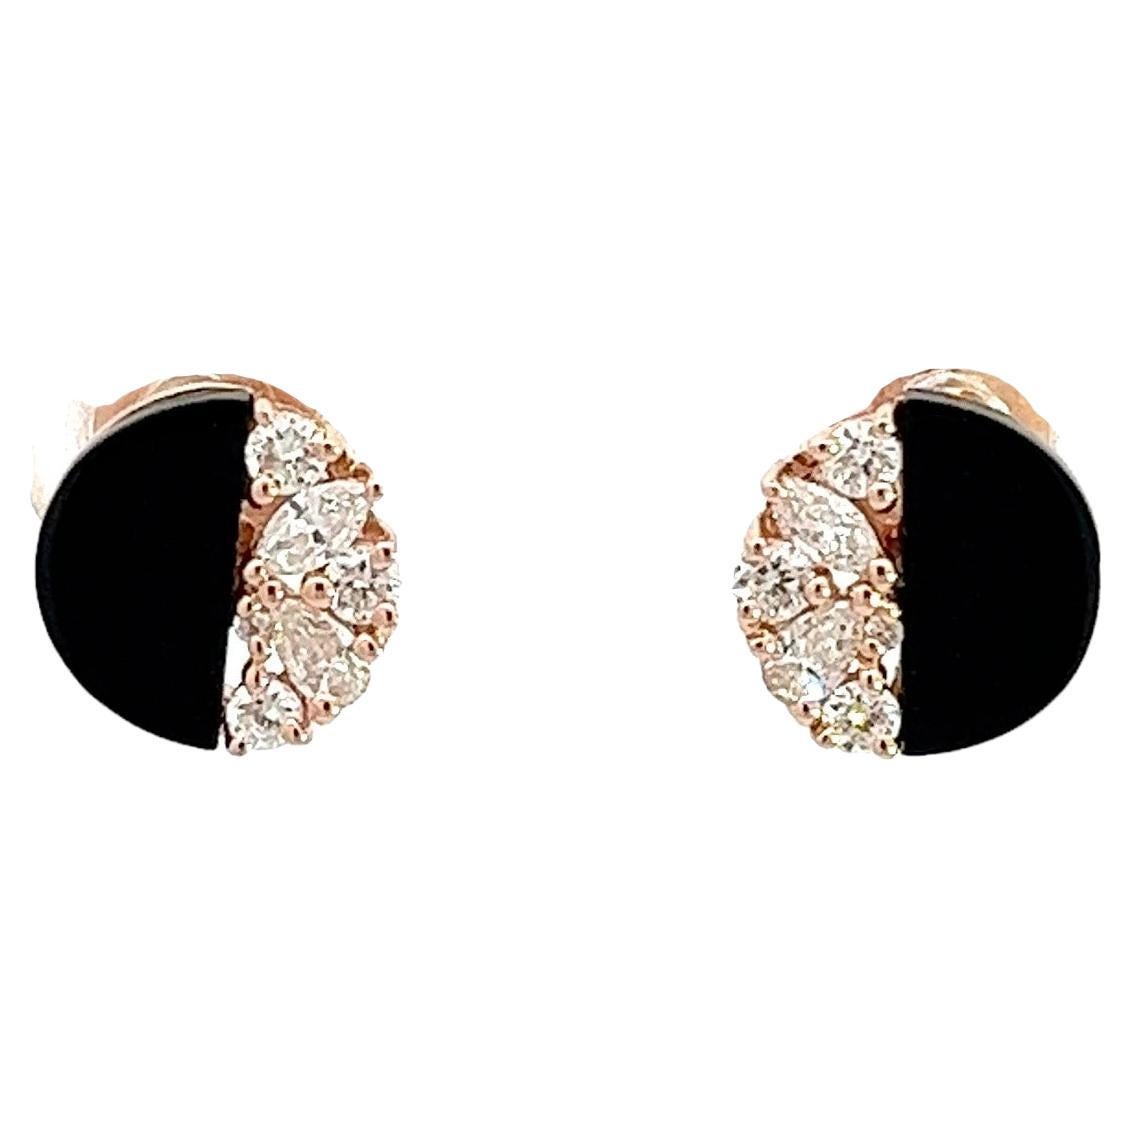 14K Rose Gold Ring (Matching Necklace and Earrings Available)

Diamond 4